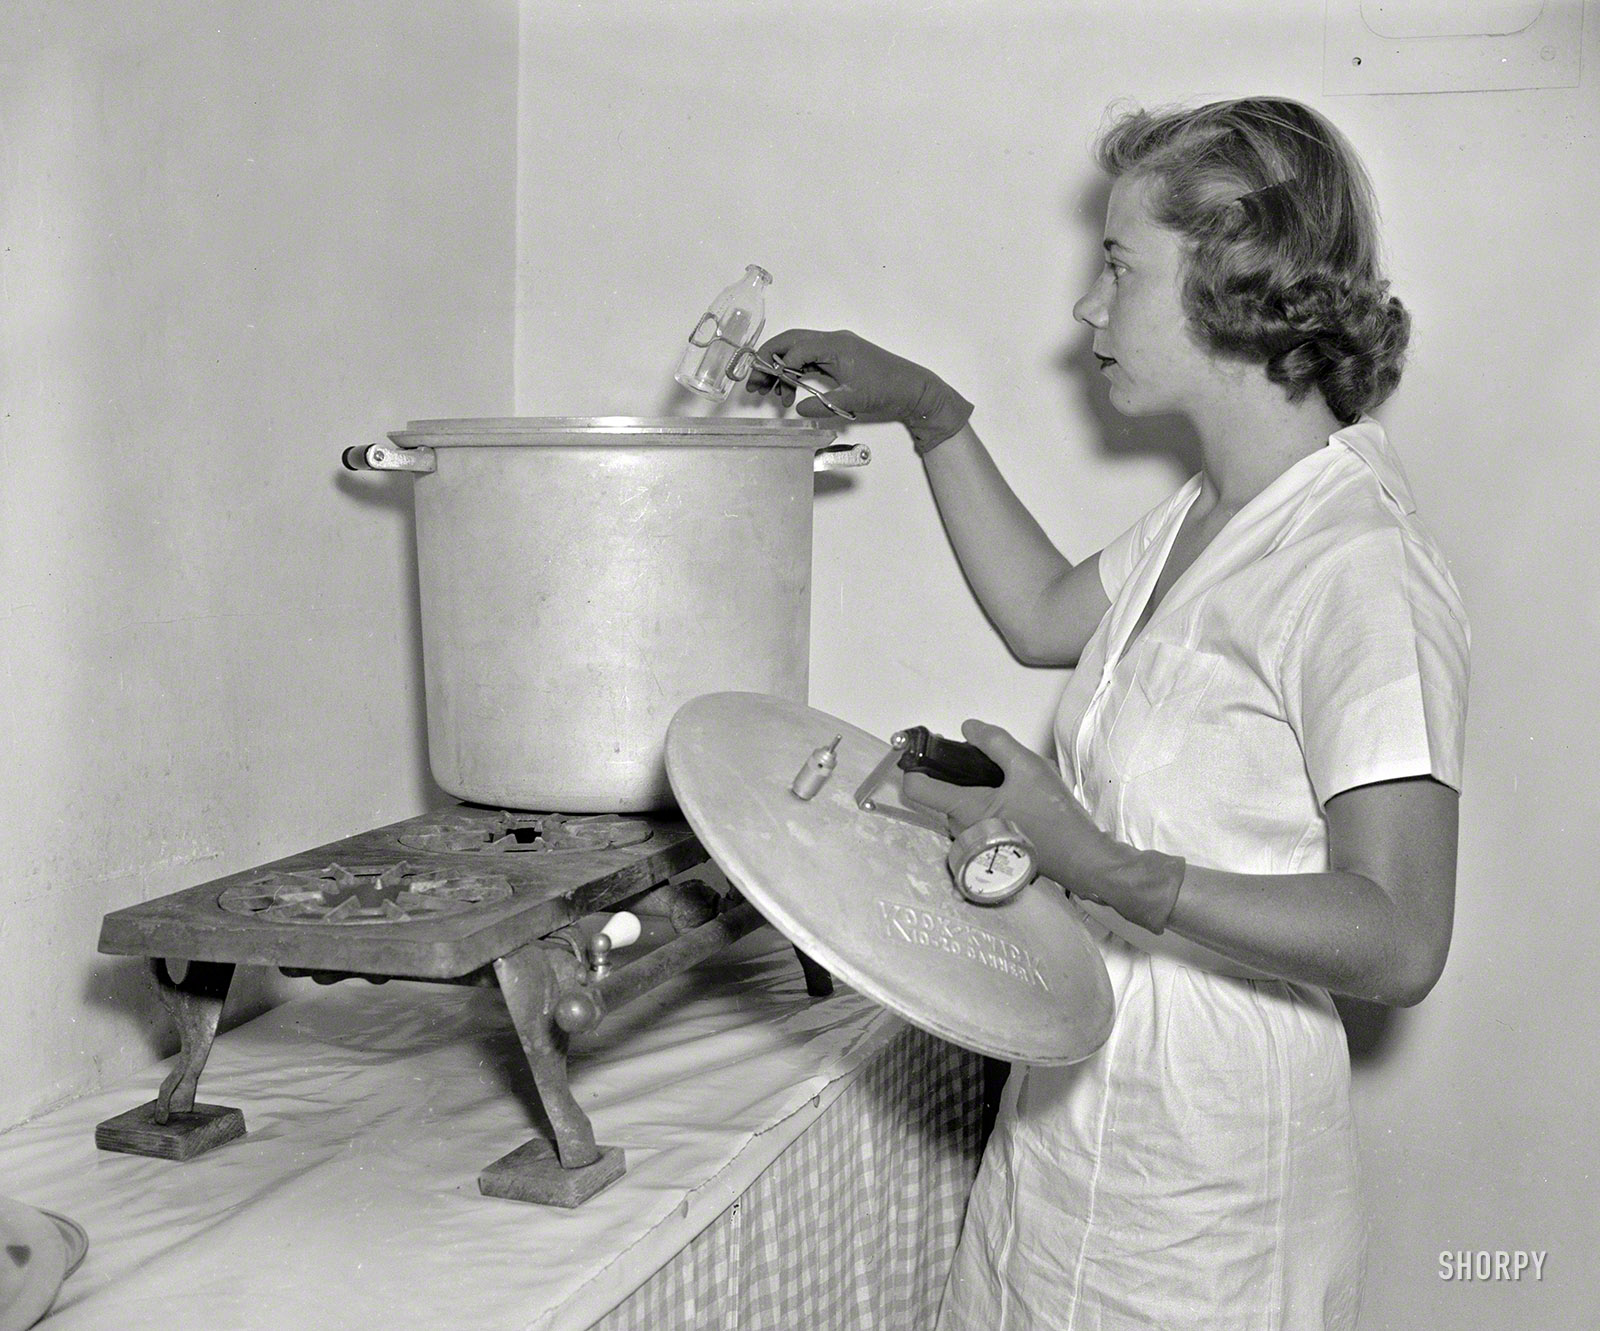 August 18, 1937. Washington, D.C. "Baby Service, Inc. Miss Ann Turner sterilizing bottles." Harris & Ewing Collection glass negative. View full size.